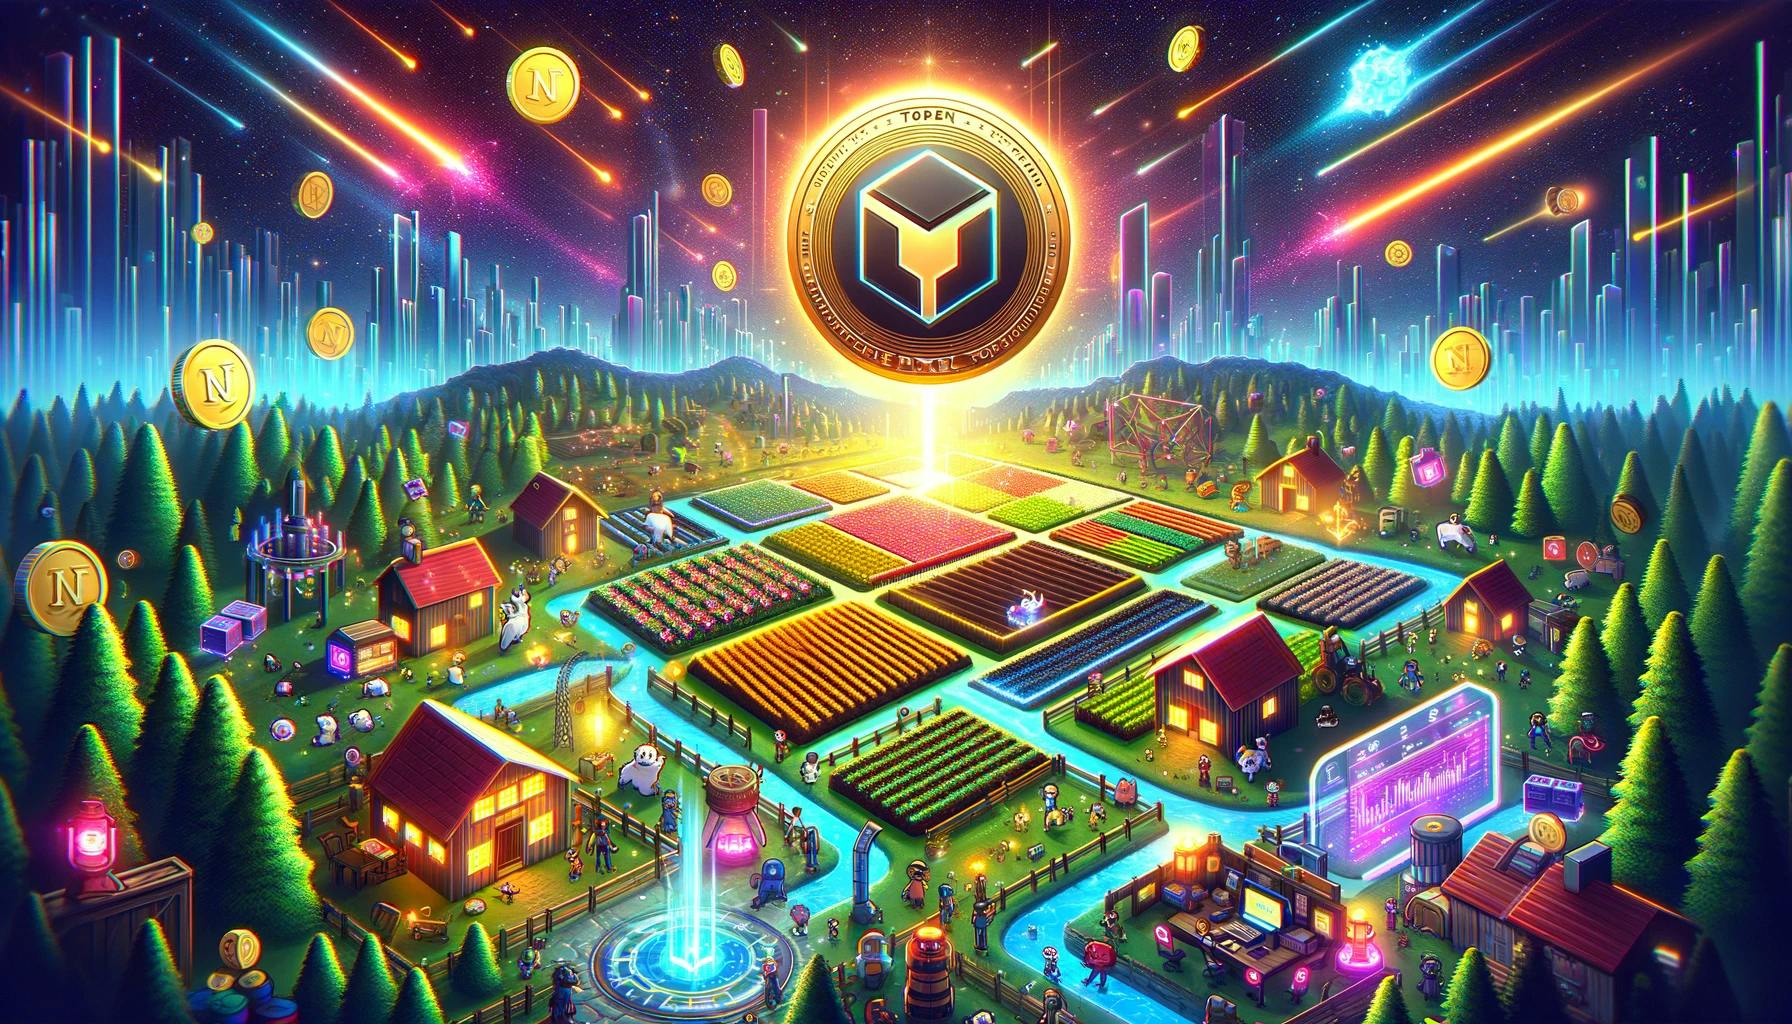 DALL·E 2024-02-20 12.36.41 - Visualize a vibrant and dynamic scene that celebrates the launch of the PIXEL token in the world of crypto gaming. Imagine a digital landscape filled